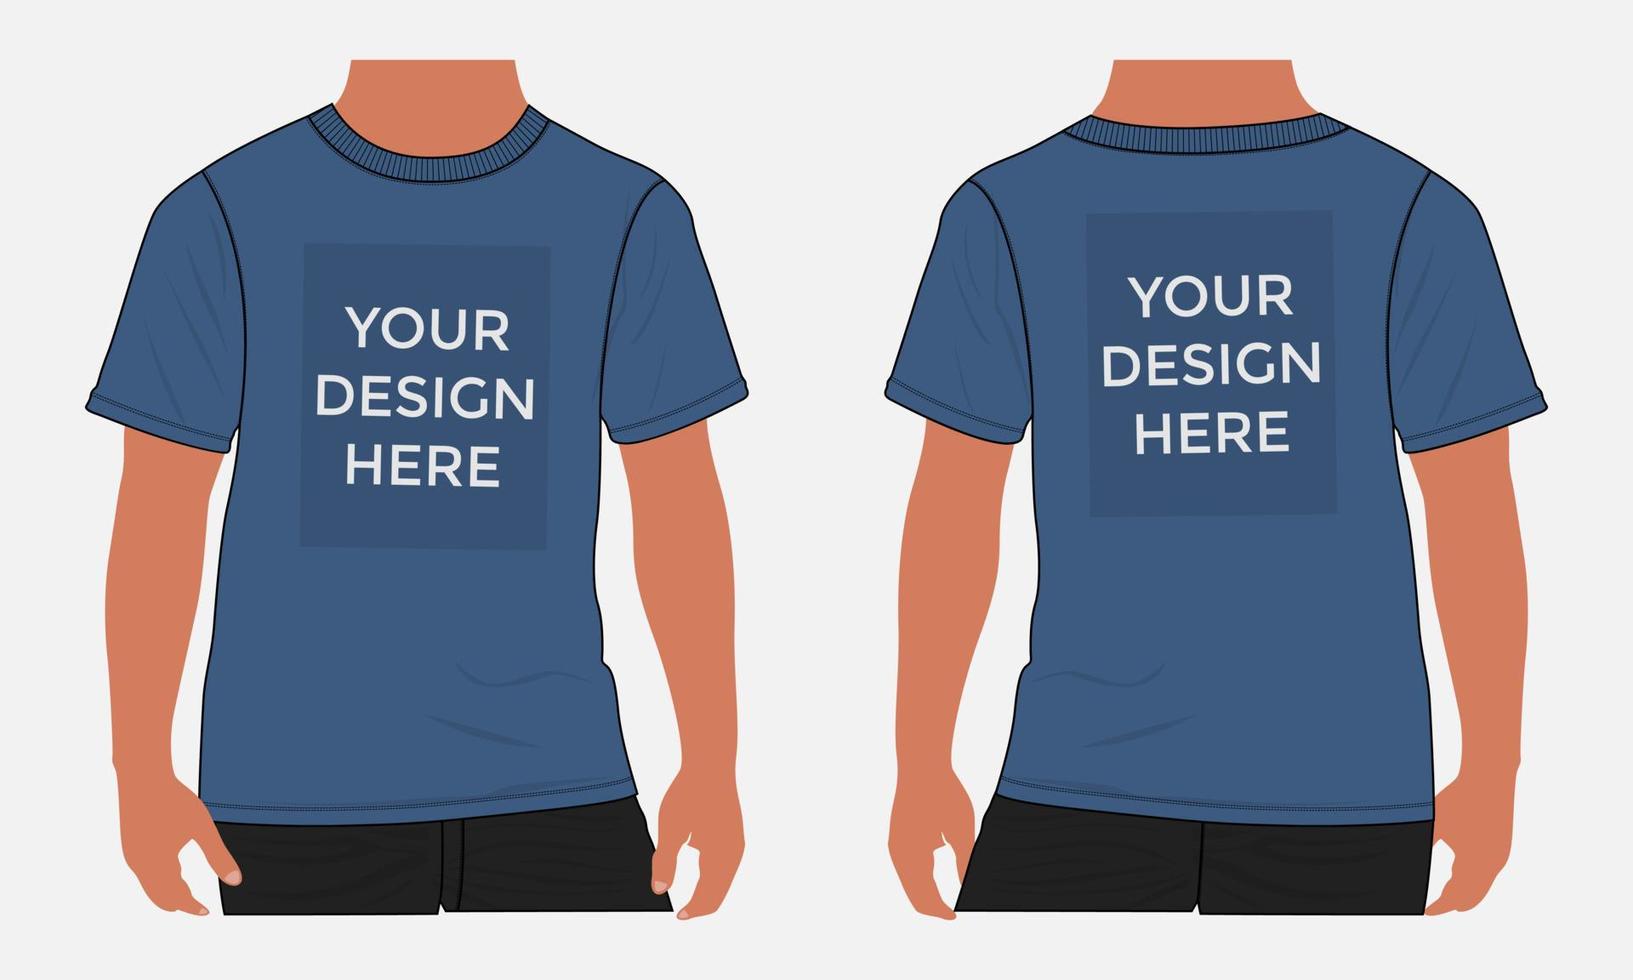 Short sleeve t shirt vector illustration mock up template For Men's and boys. Apparel Design Cad front and back views easy edit and customizable.